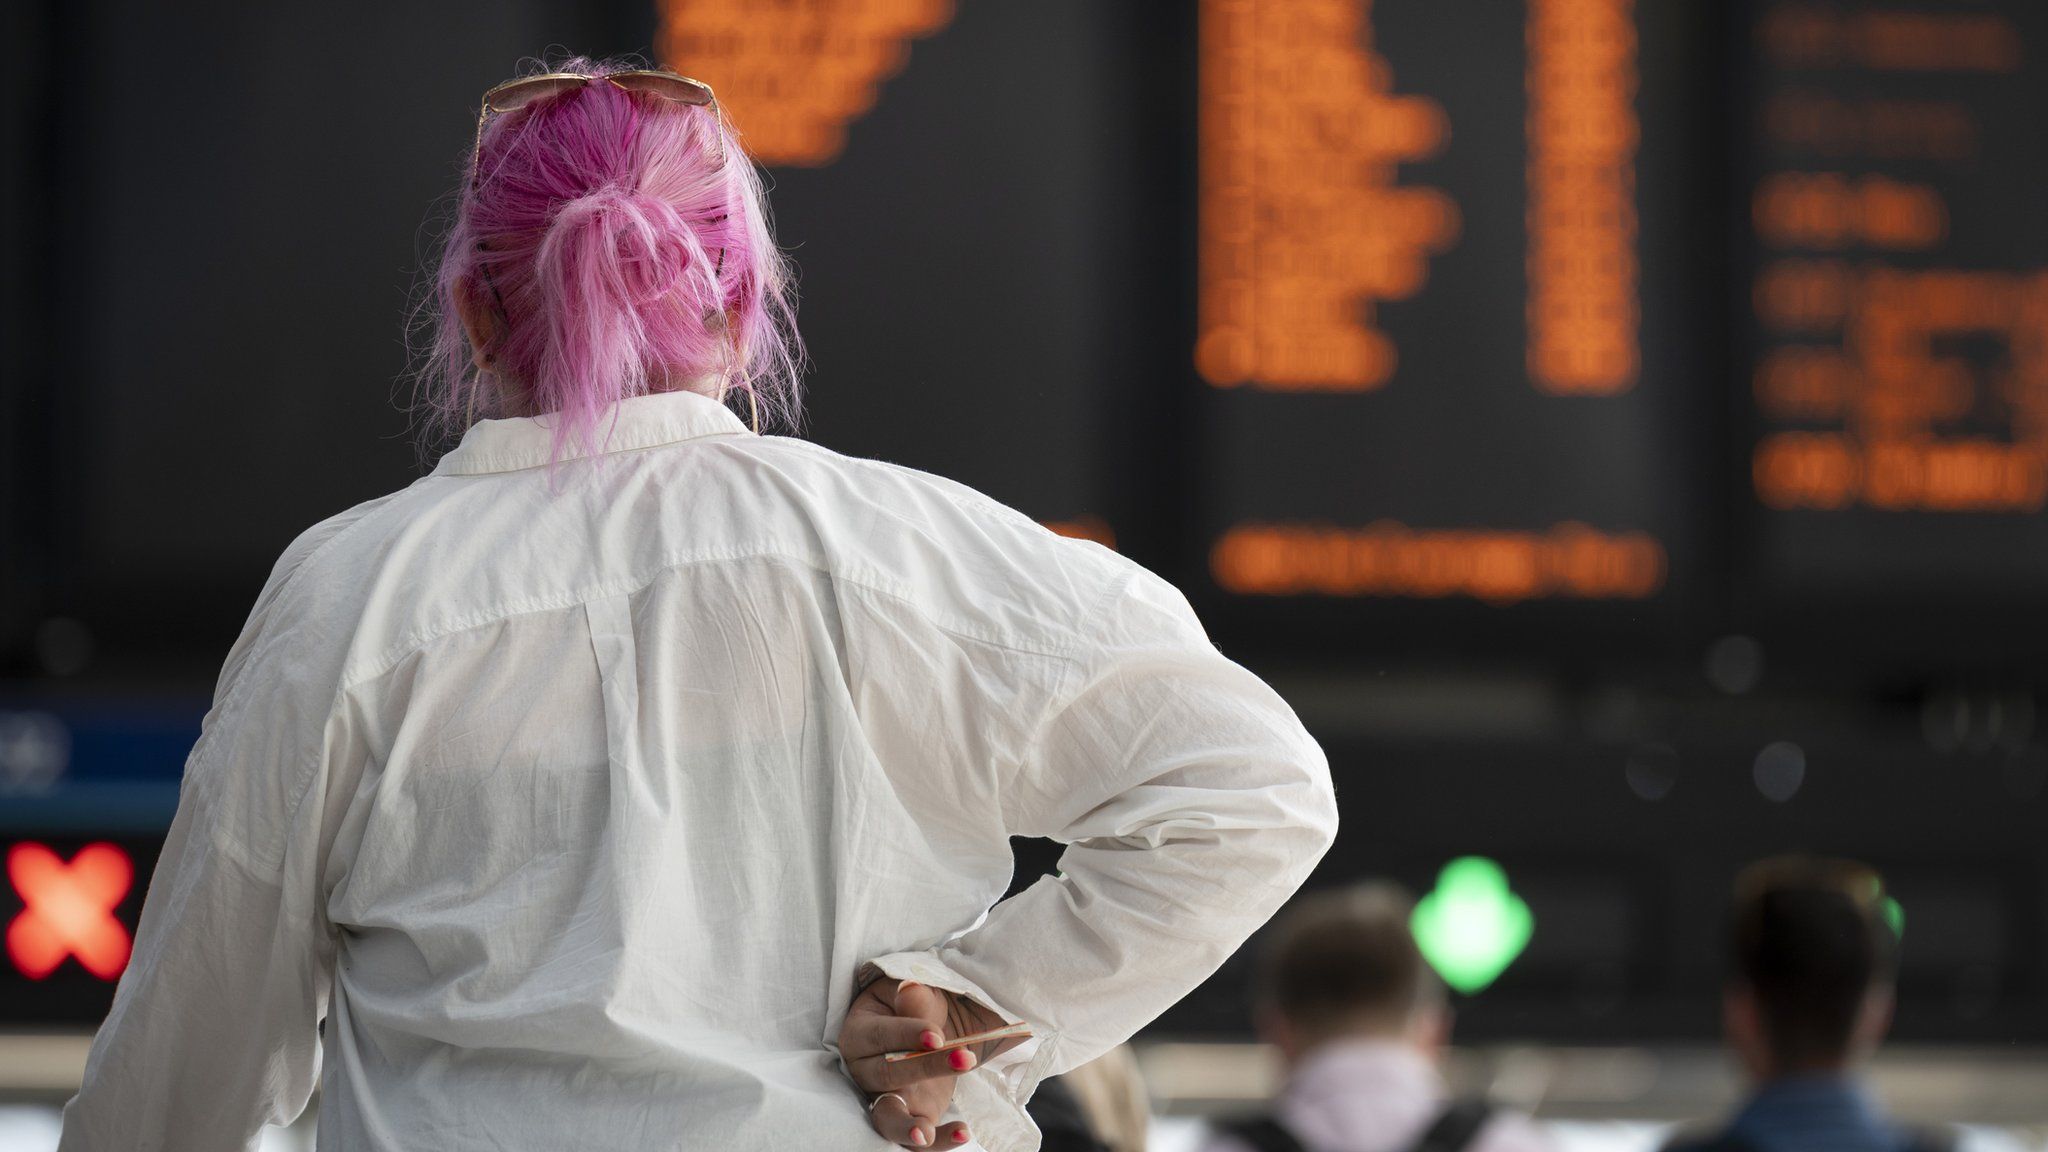 Woman looks at rail departures board